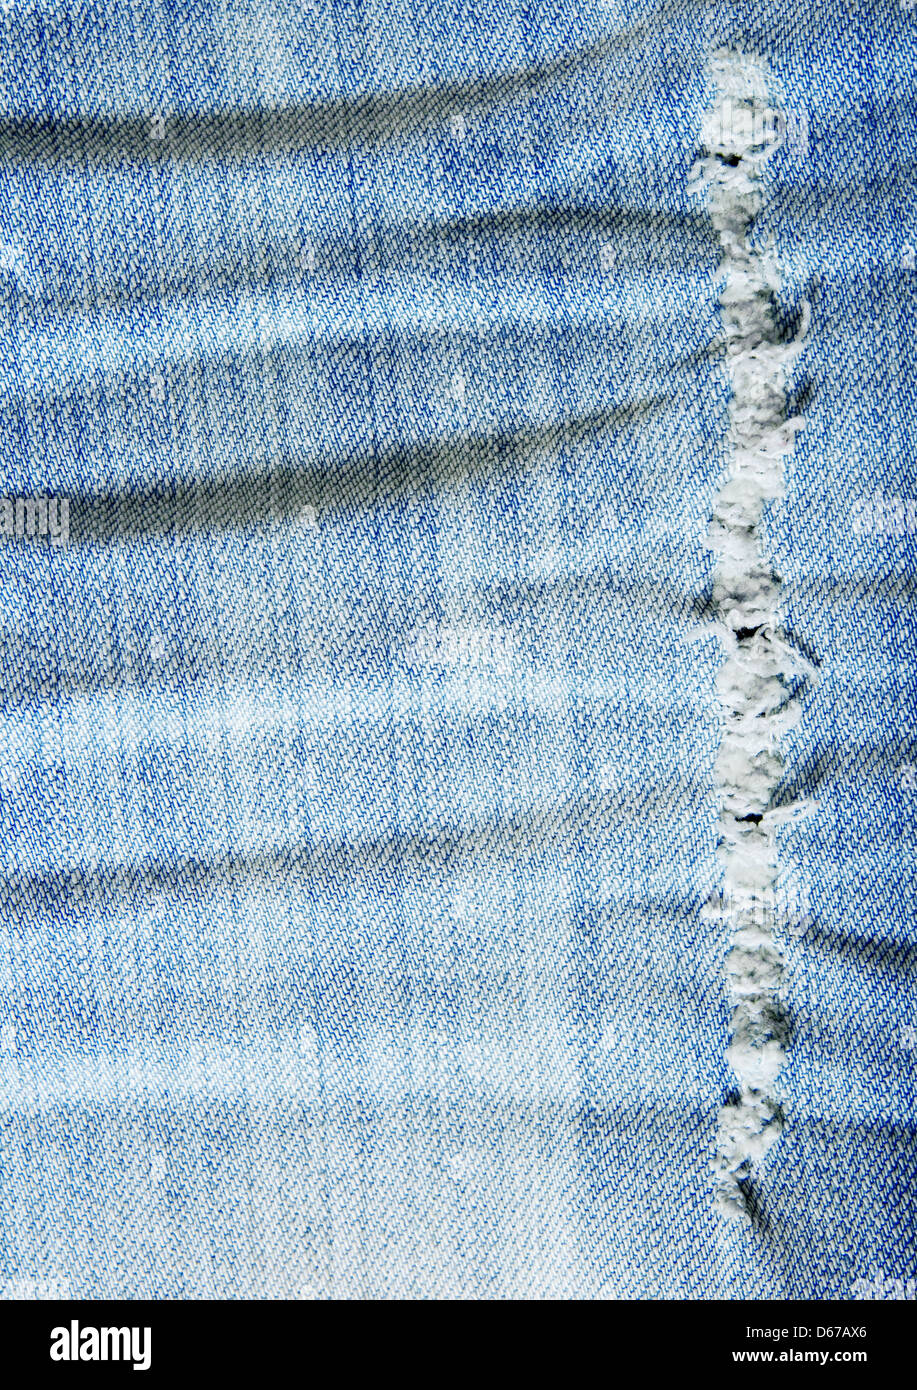 Worn out wrinkled denim fabric. Old blue jeans. Stock Photo